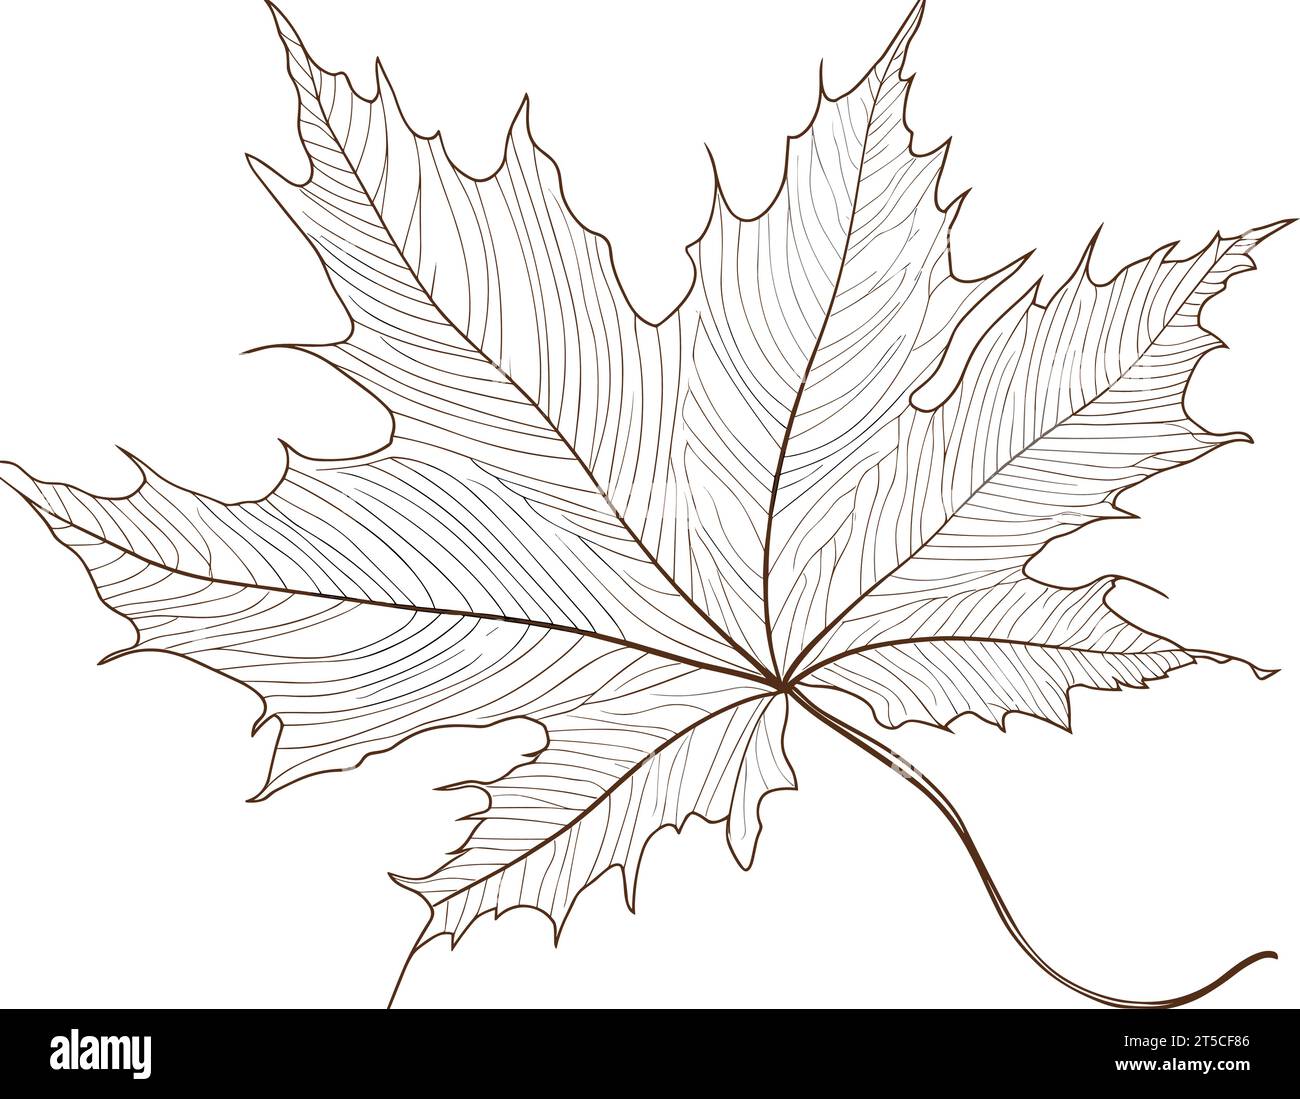 Drawing of Maple leaf. Linear and silhouette illustration separated, sweeping overdrawn lines. Stock Vector